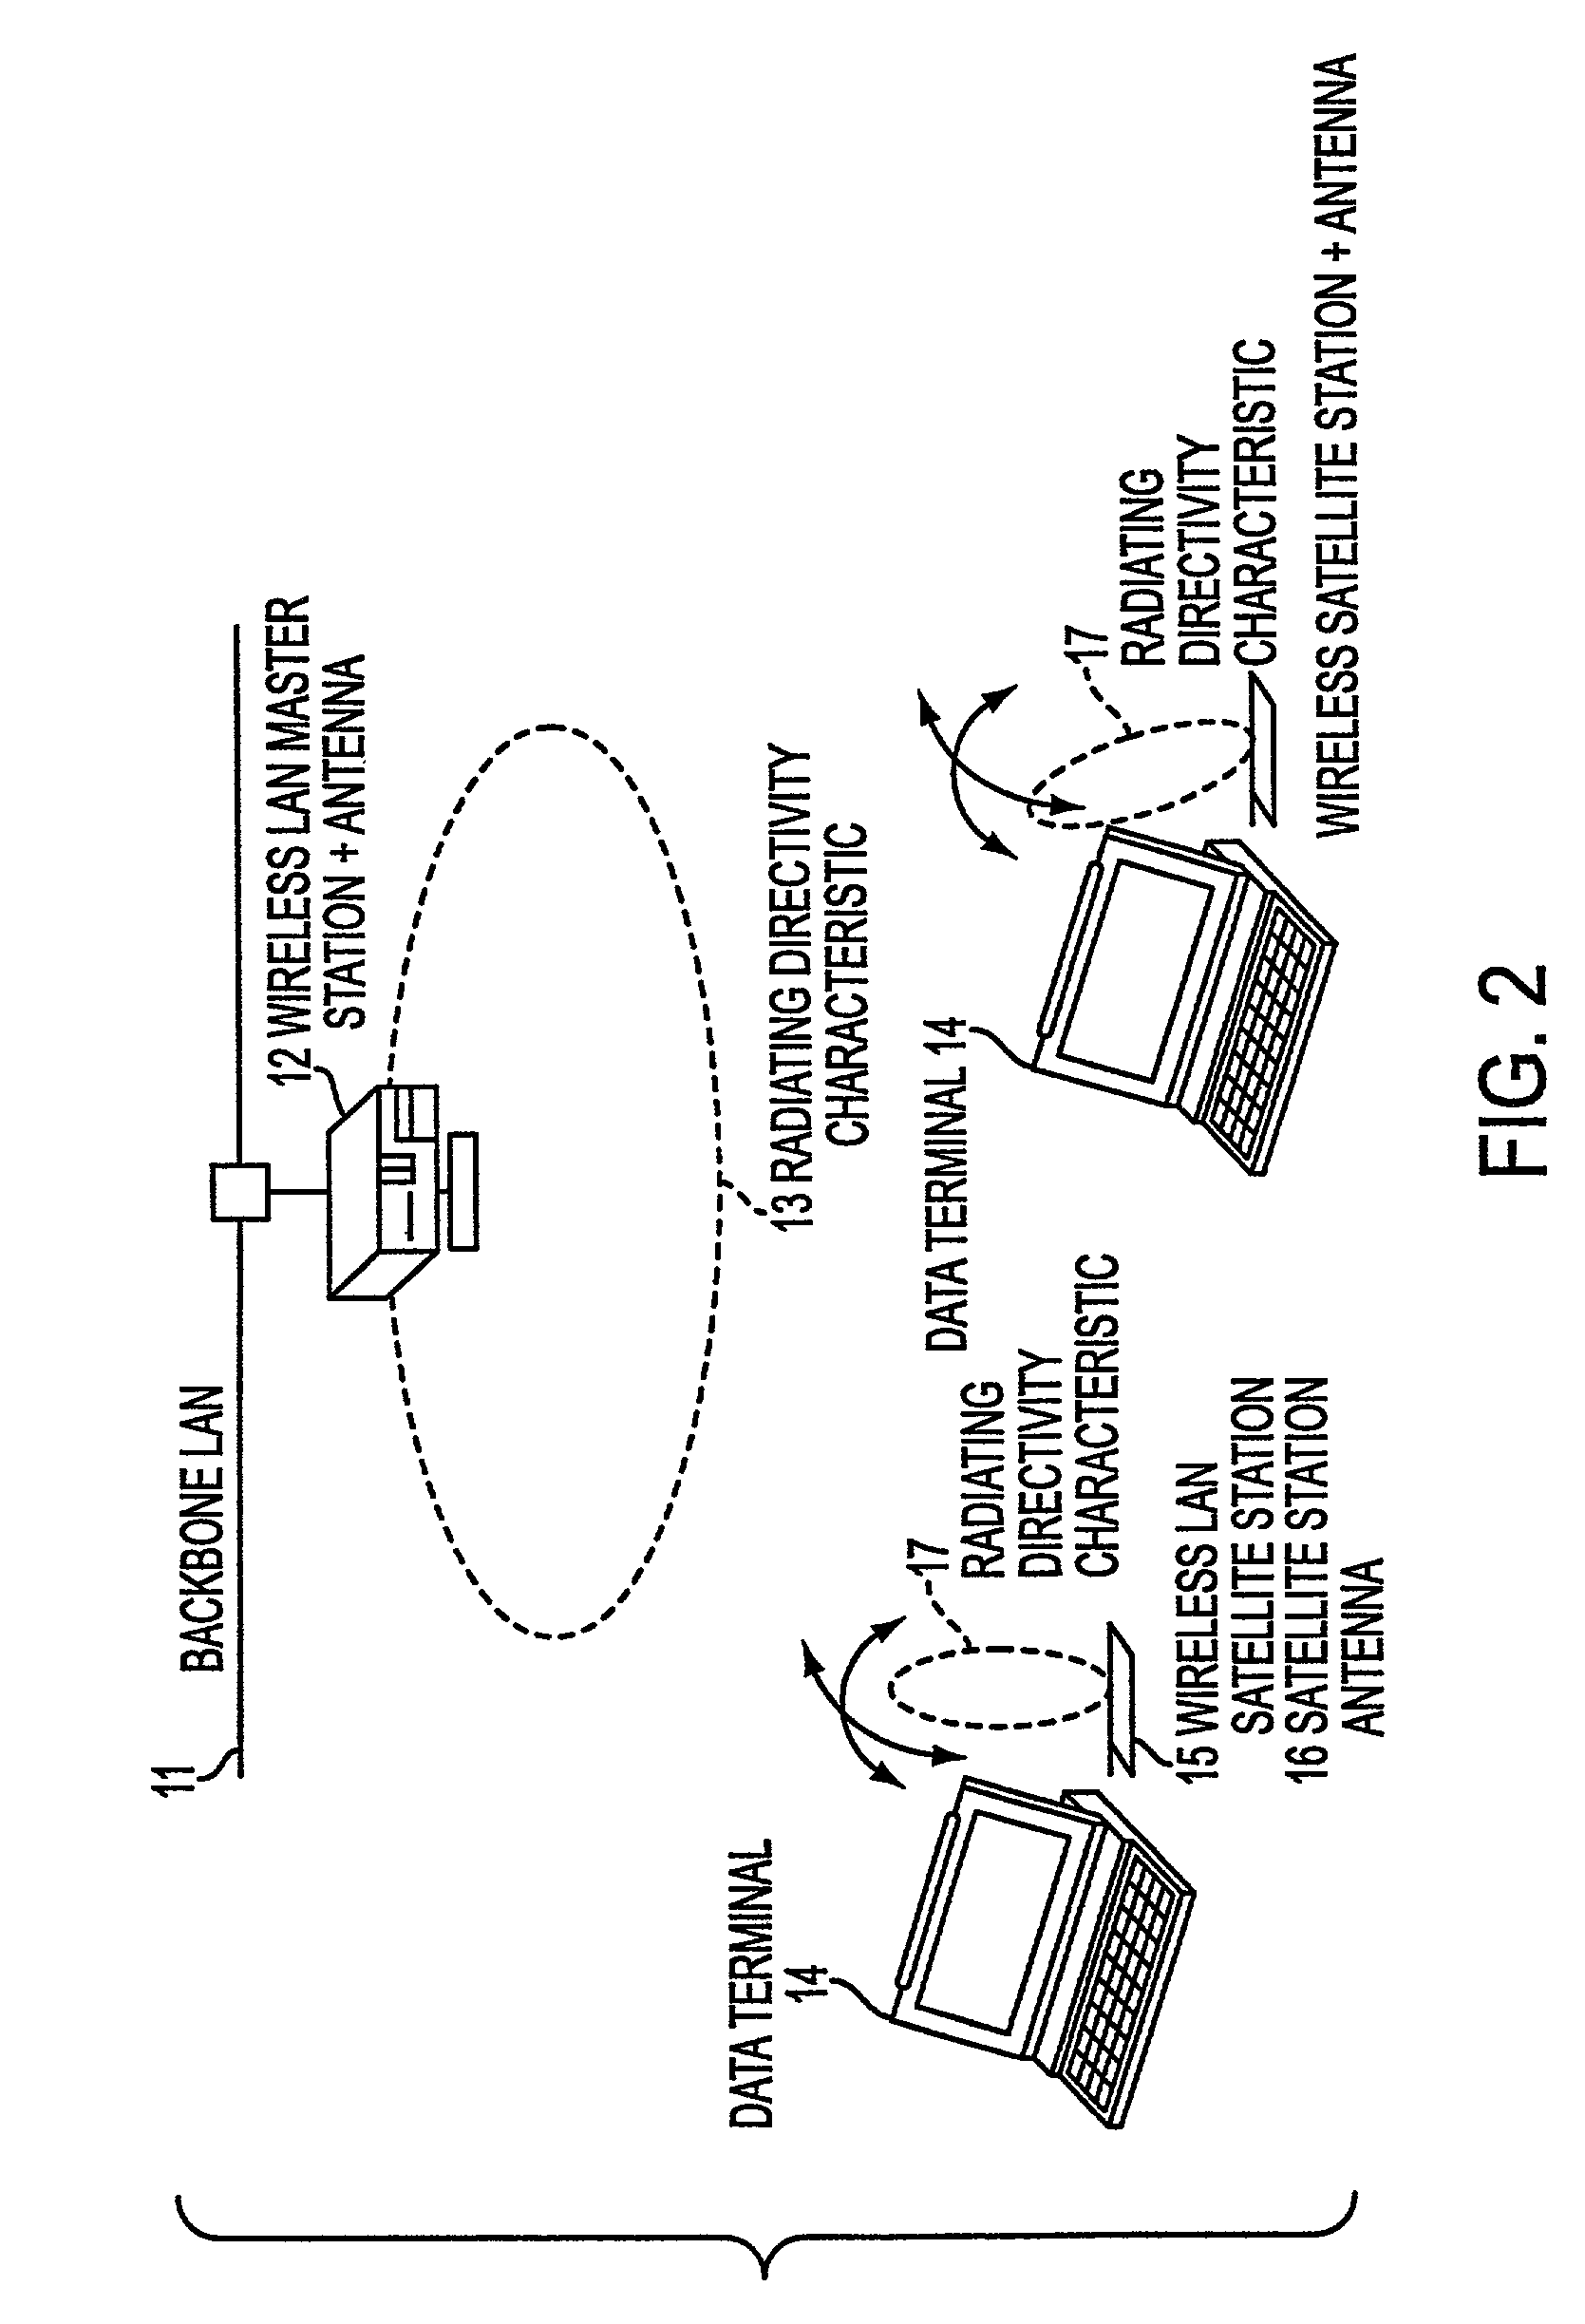 Wireless LAN system and a transmitter-receiver in a wireless LAN system